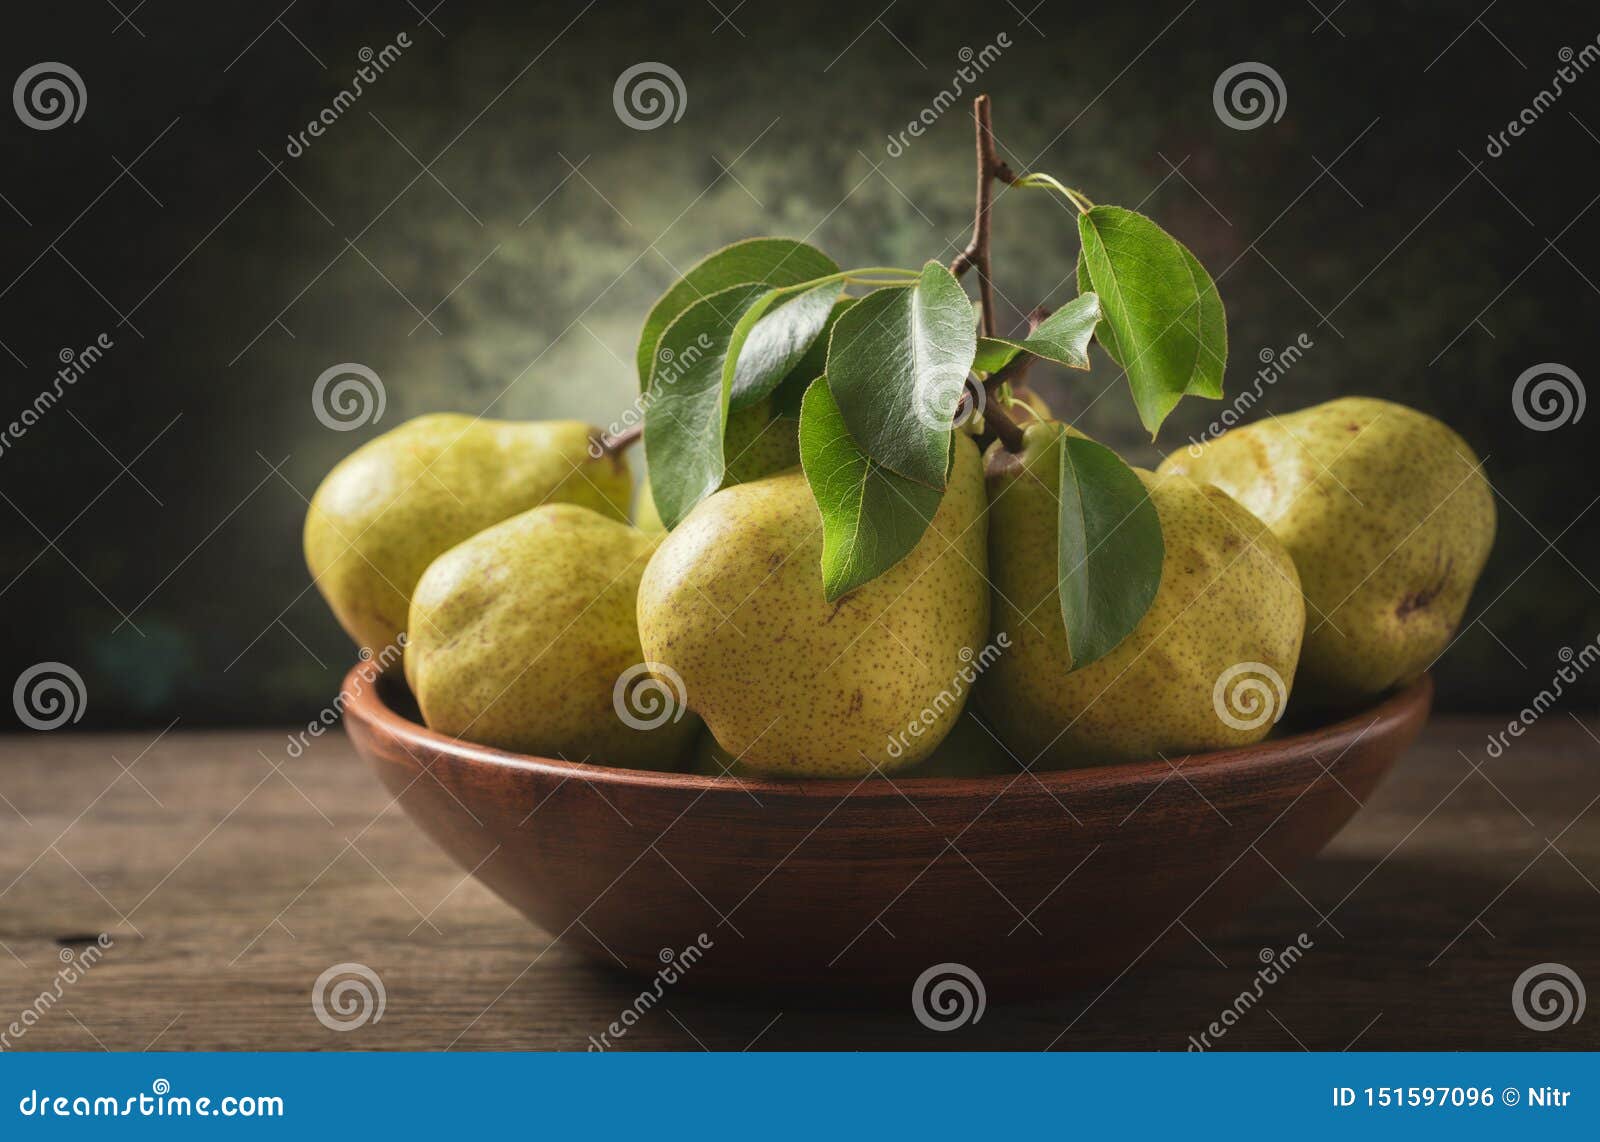 still life with fresh pears with leaves in a bowl